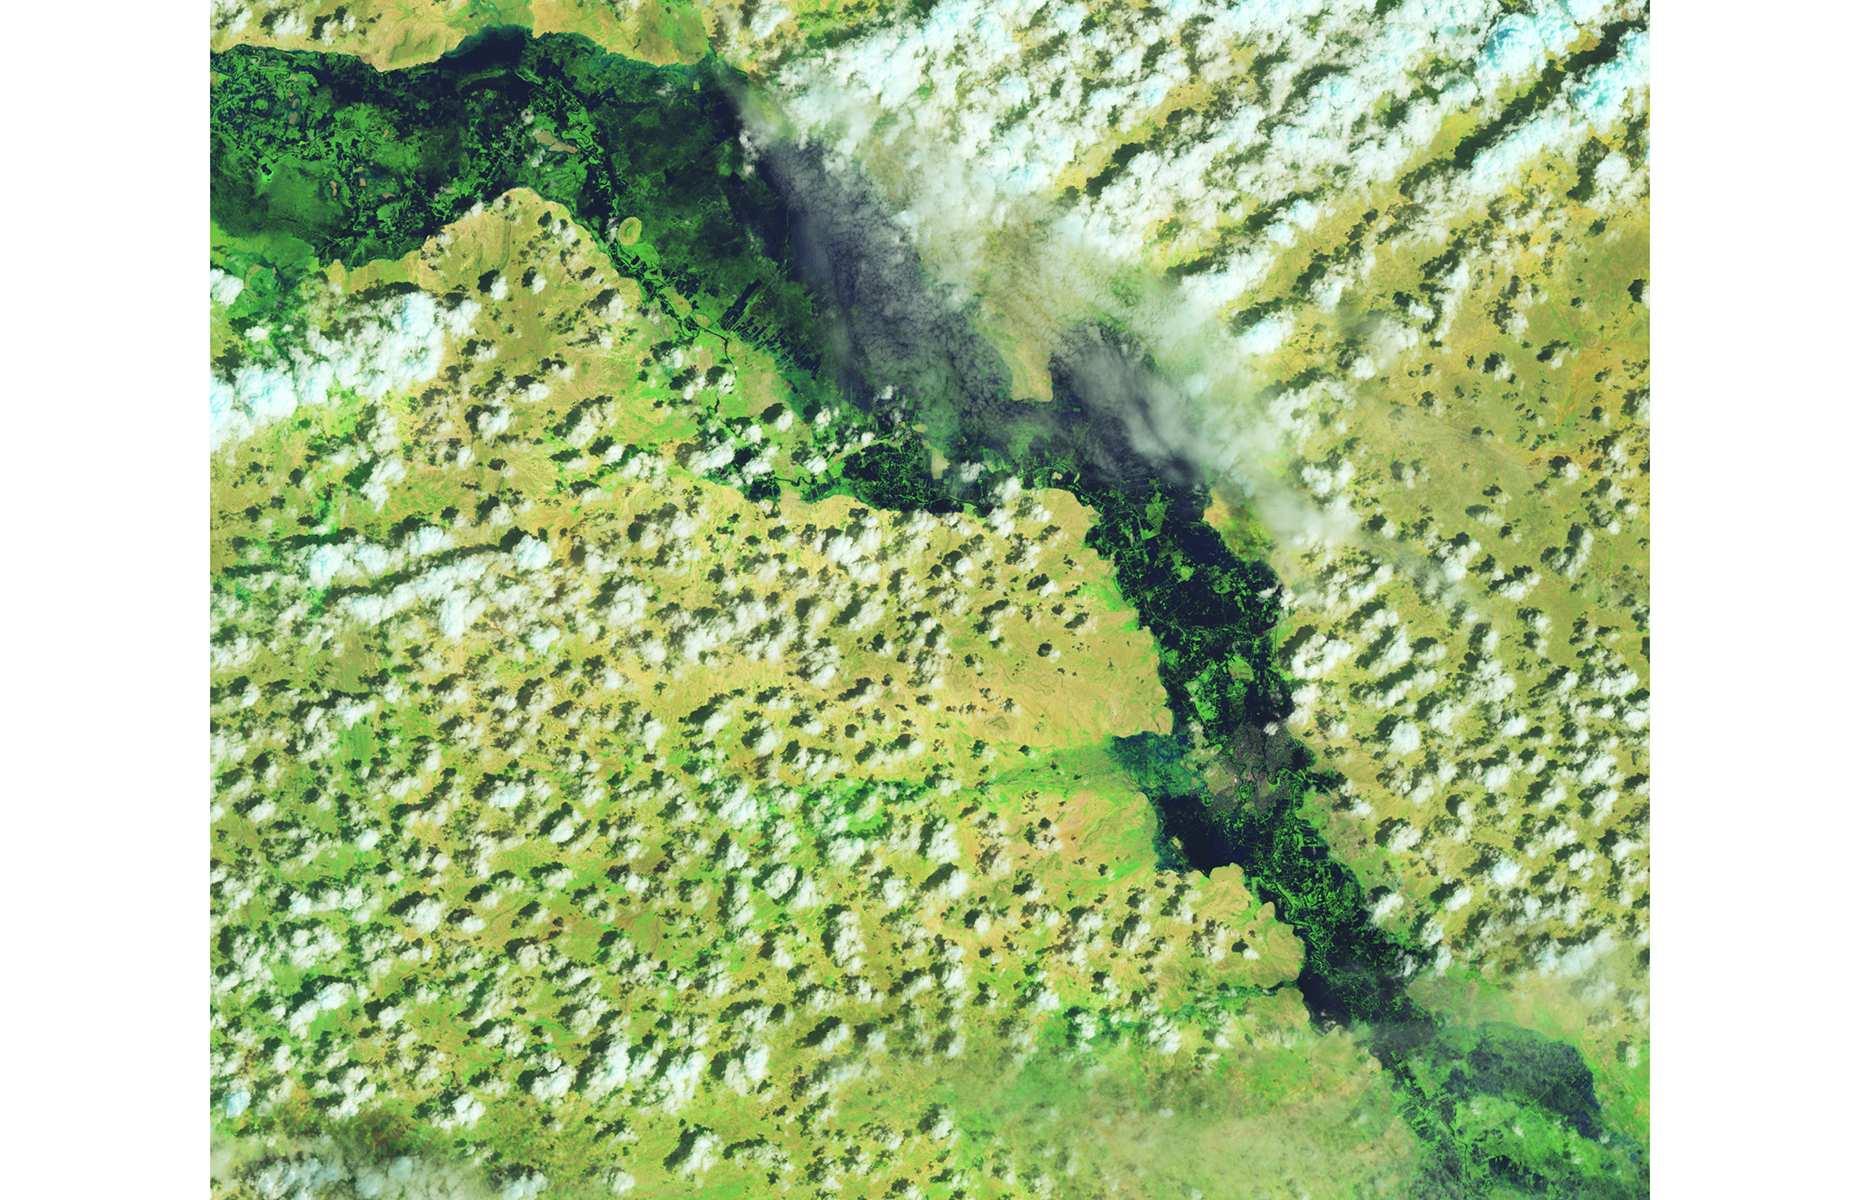 <p>Within a couple of months of the previous image being captured, the Shebelle River looked unrecognisable after a deluge of heavy rain led to its overflow. As shown here via NASA's satellite imaging from 15 November 2023, extensive flooding submerged previously drought-stricken parts of central Somalia, as well as areas in Ethiopia and Kenya. The floods claimed more than 100 lives from 1 October onwards and displaced more than 700,000 people, with precipitation levels ranging from double to quadruple the average for the three countries.</p>